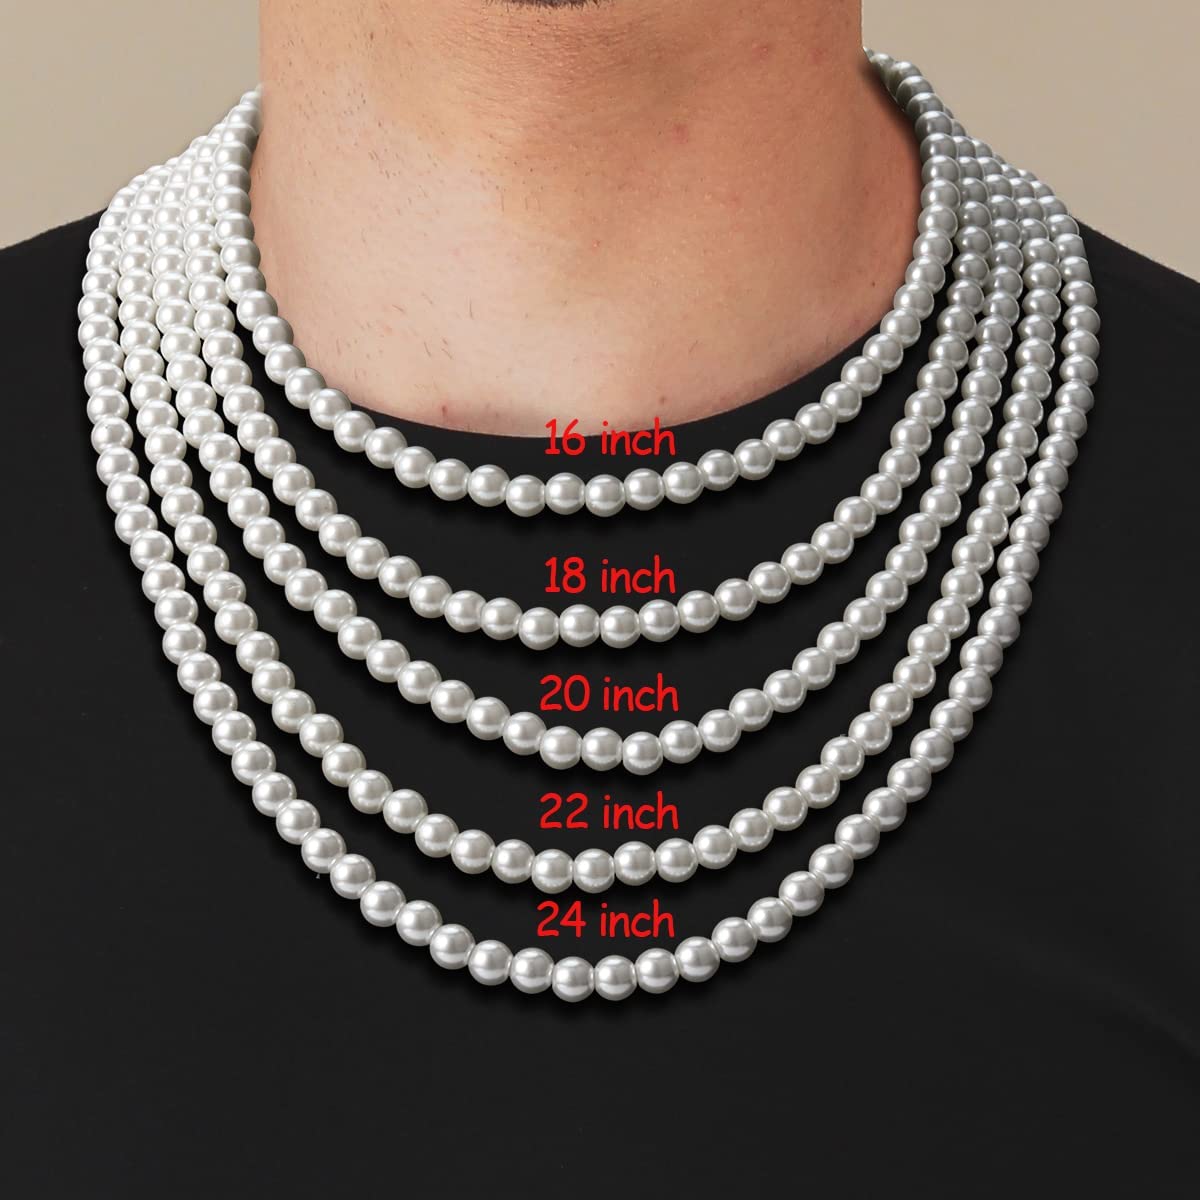 How to layer pearl necklaces